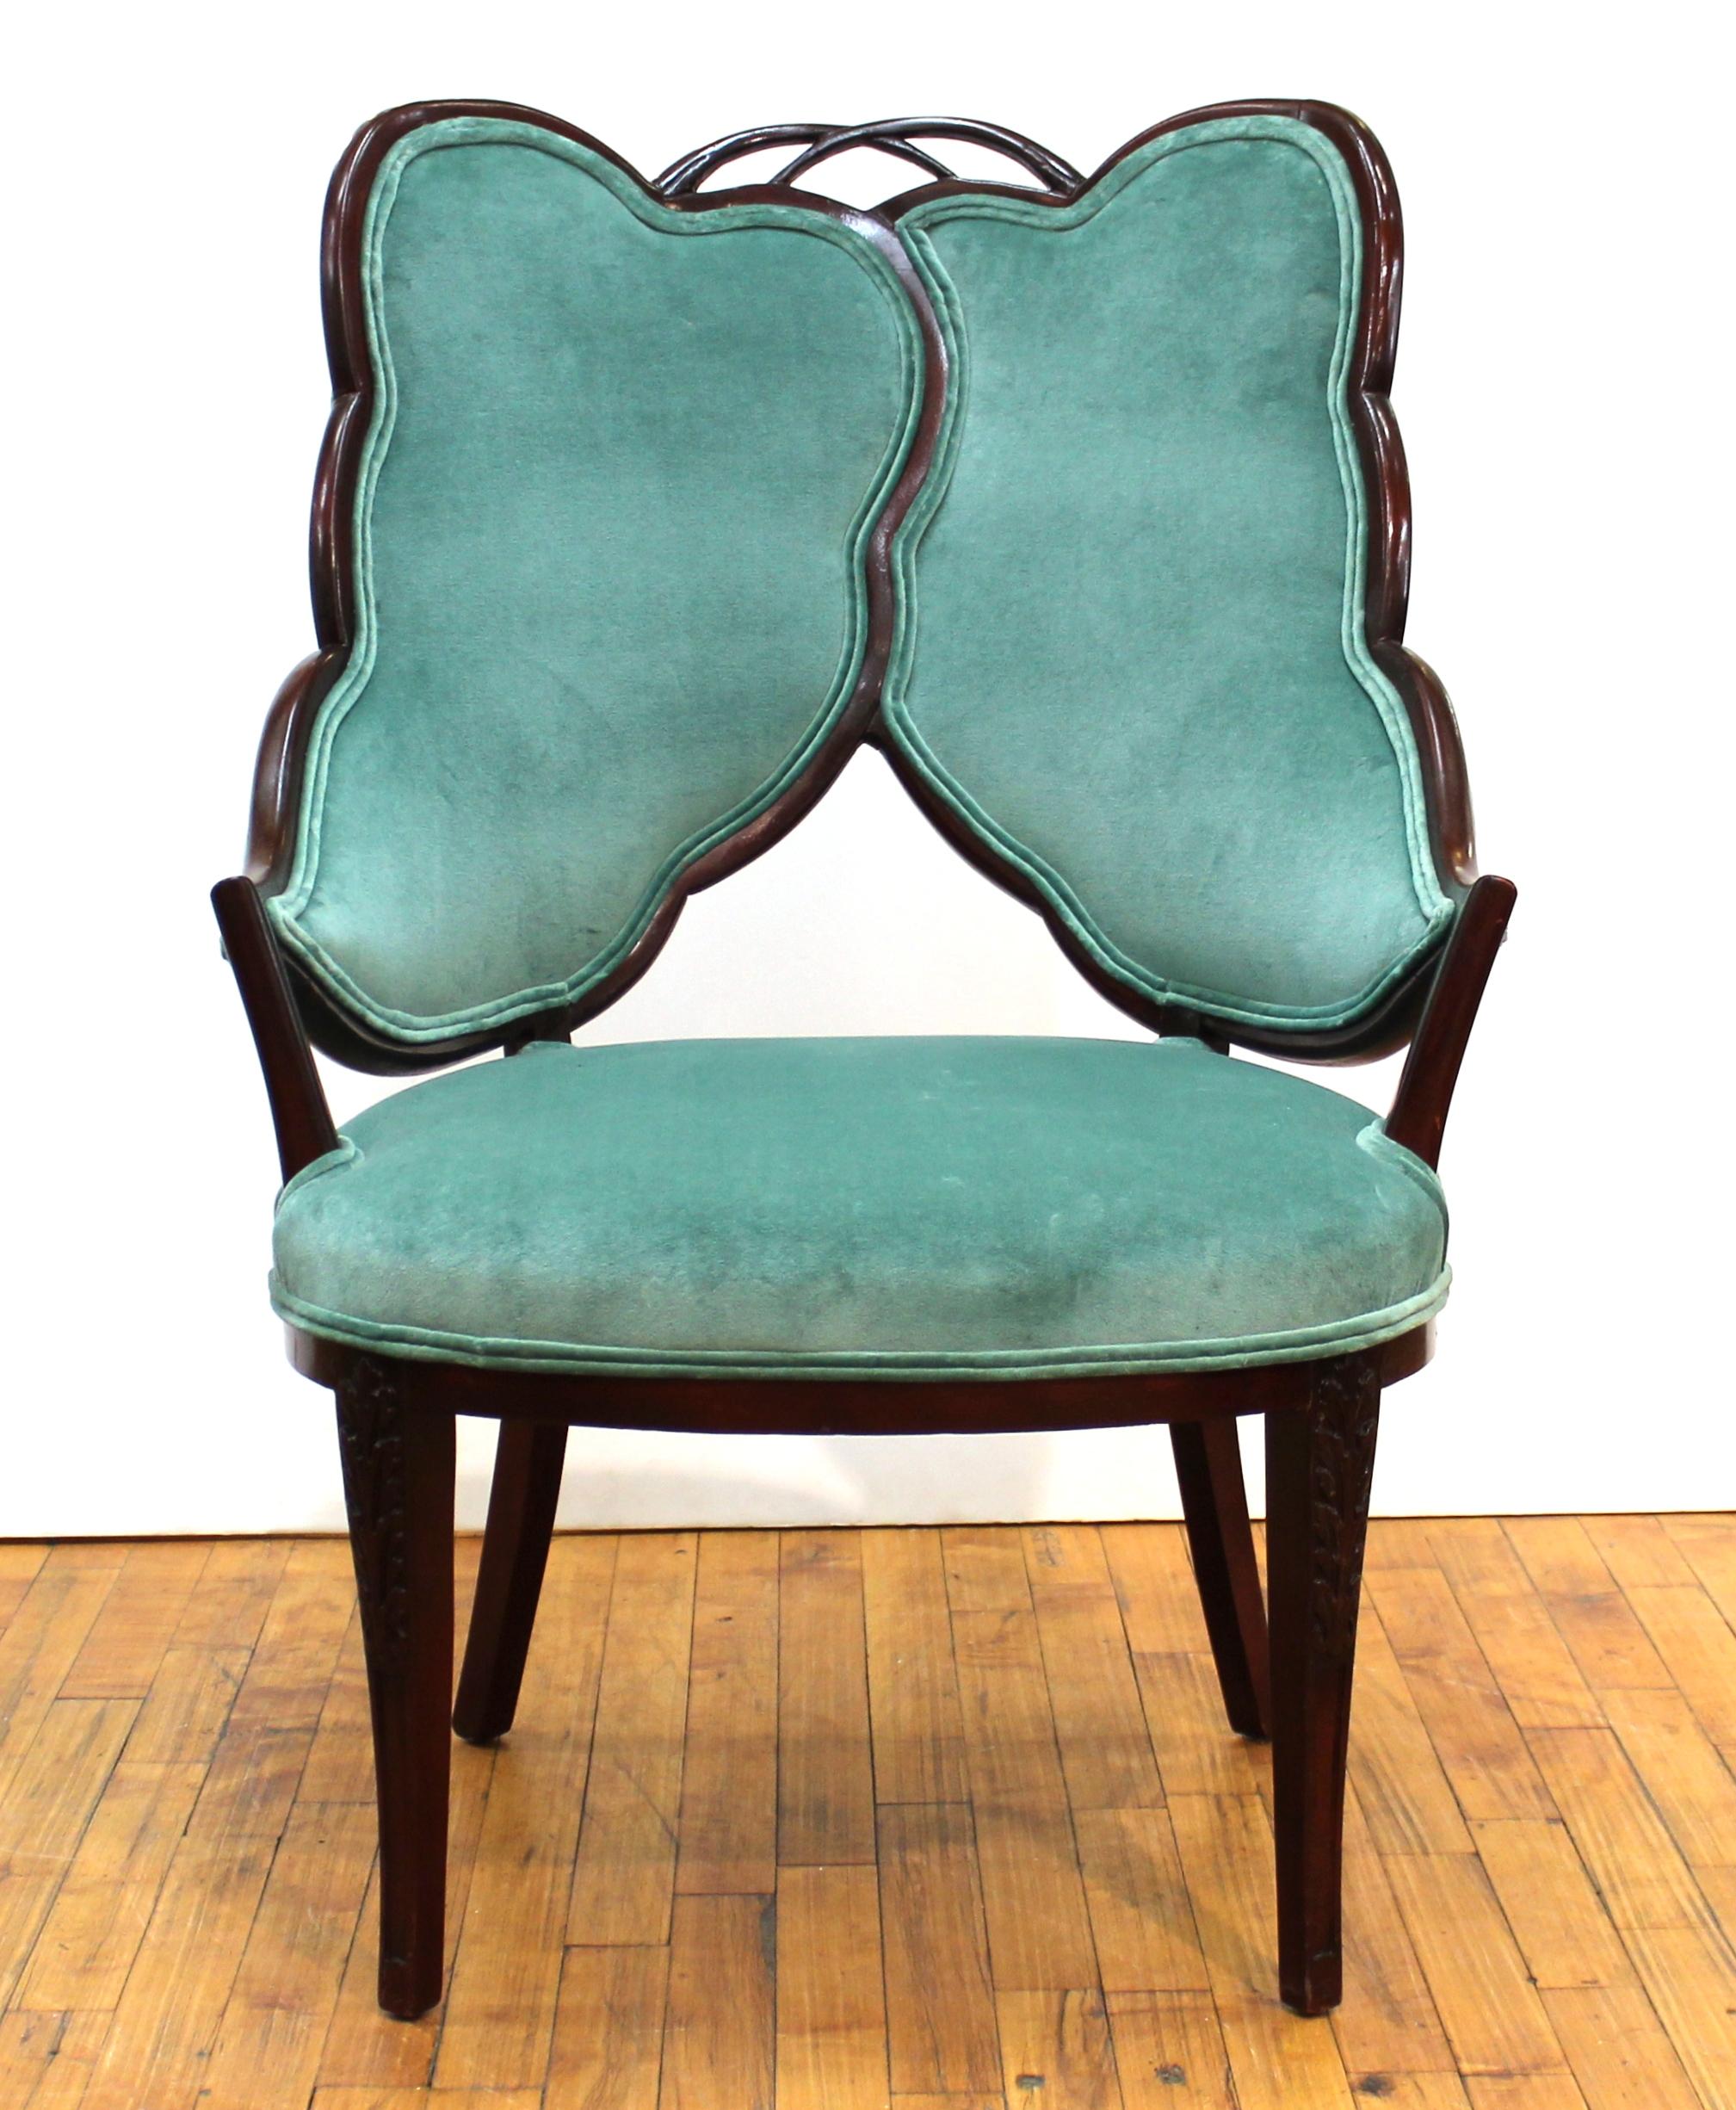 French pair of Art Deco chairs with a dramatic leaf design back. The frame is mahogany and has recently been reupholstered in a jade green velvet. In very good antique condition.